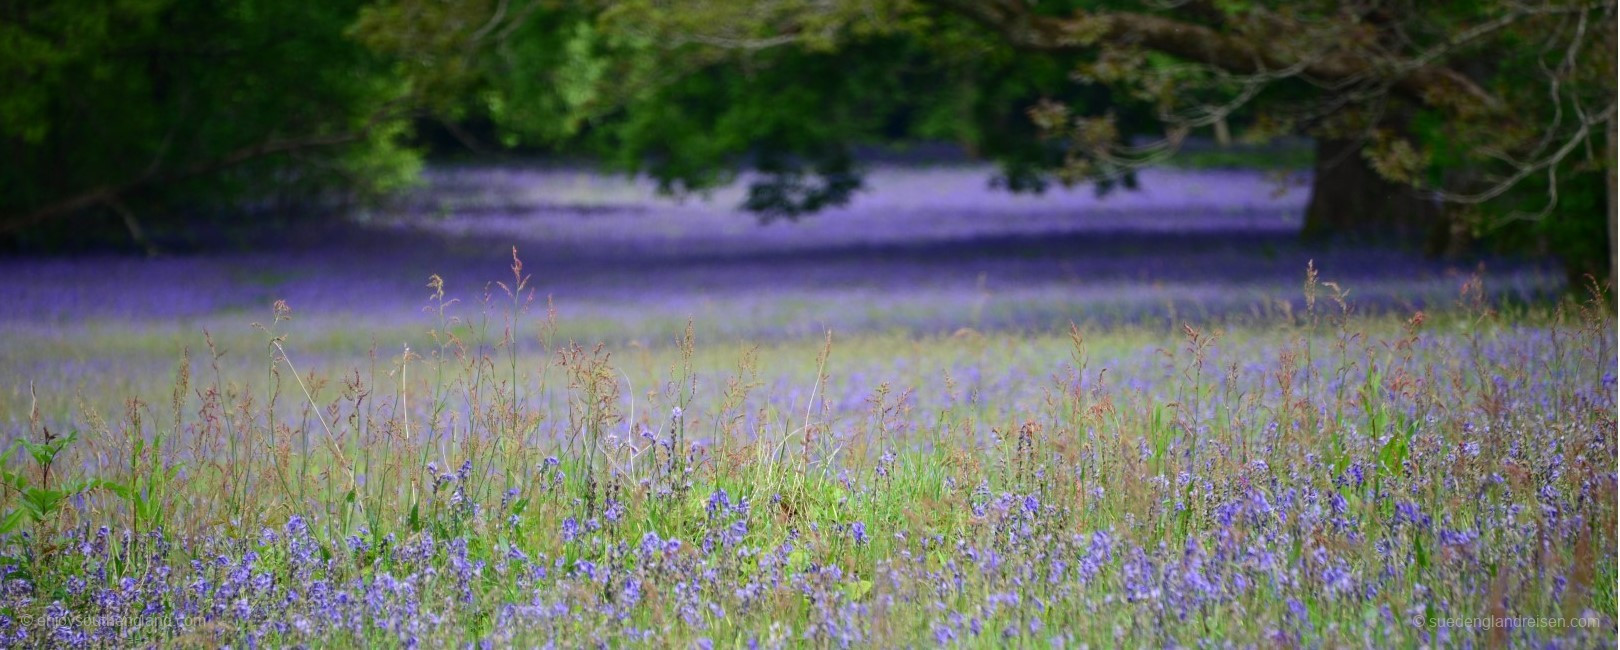 Bluebell field at Enys gardens